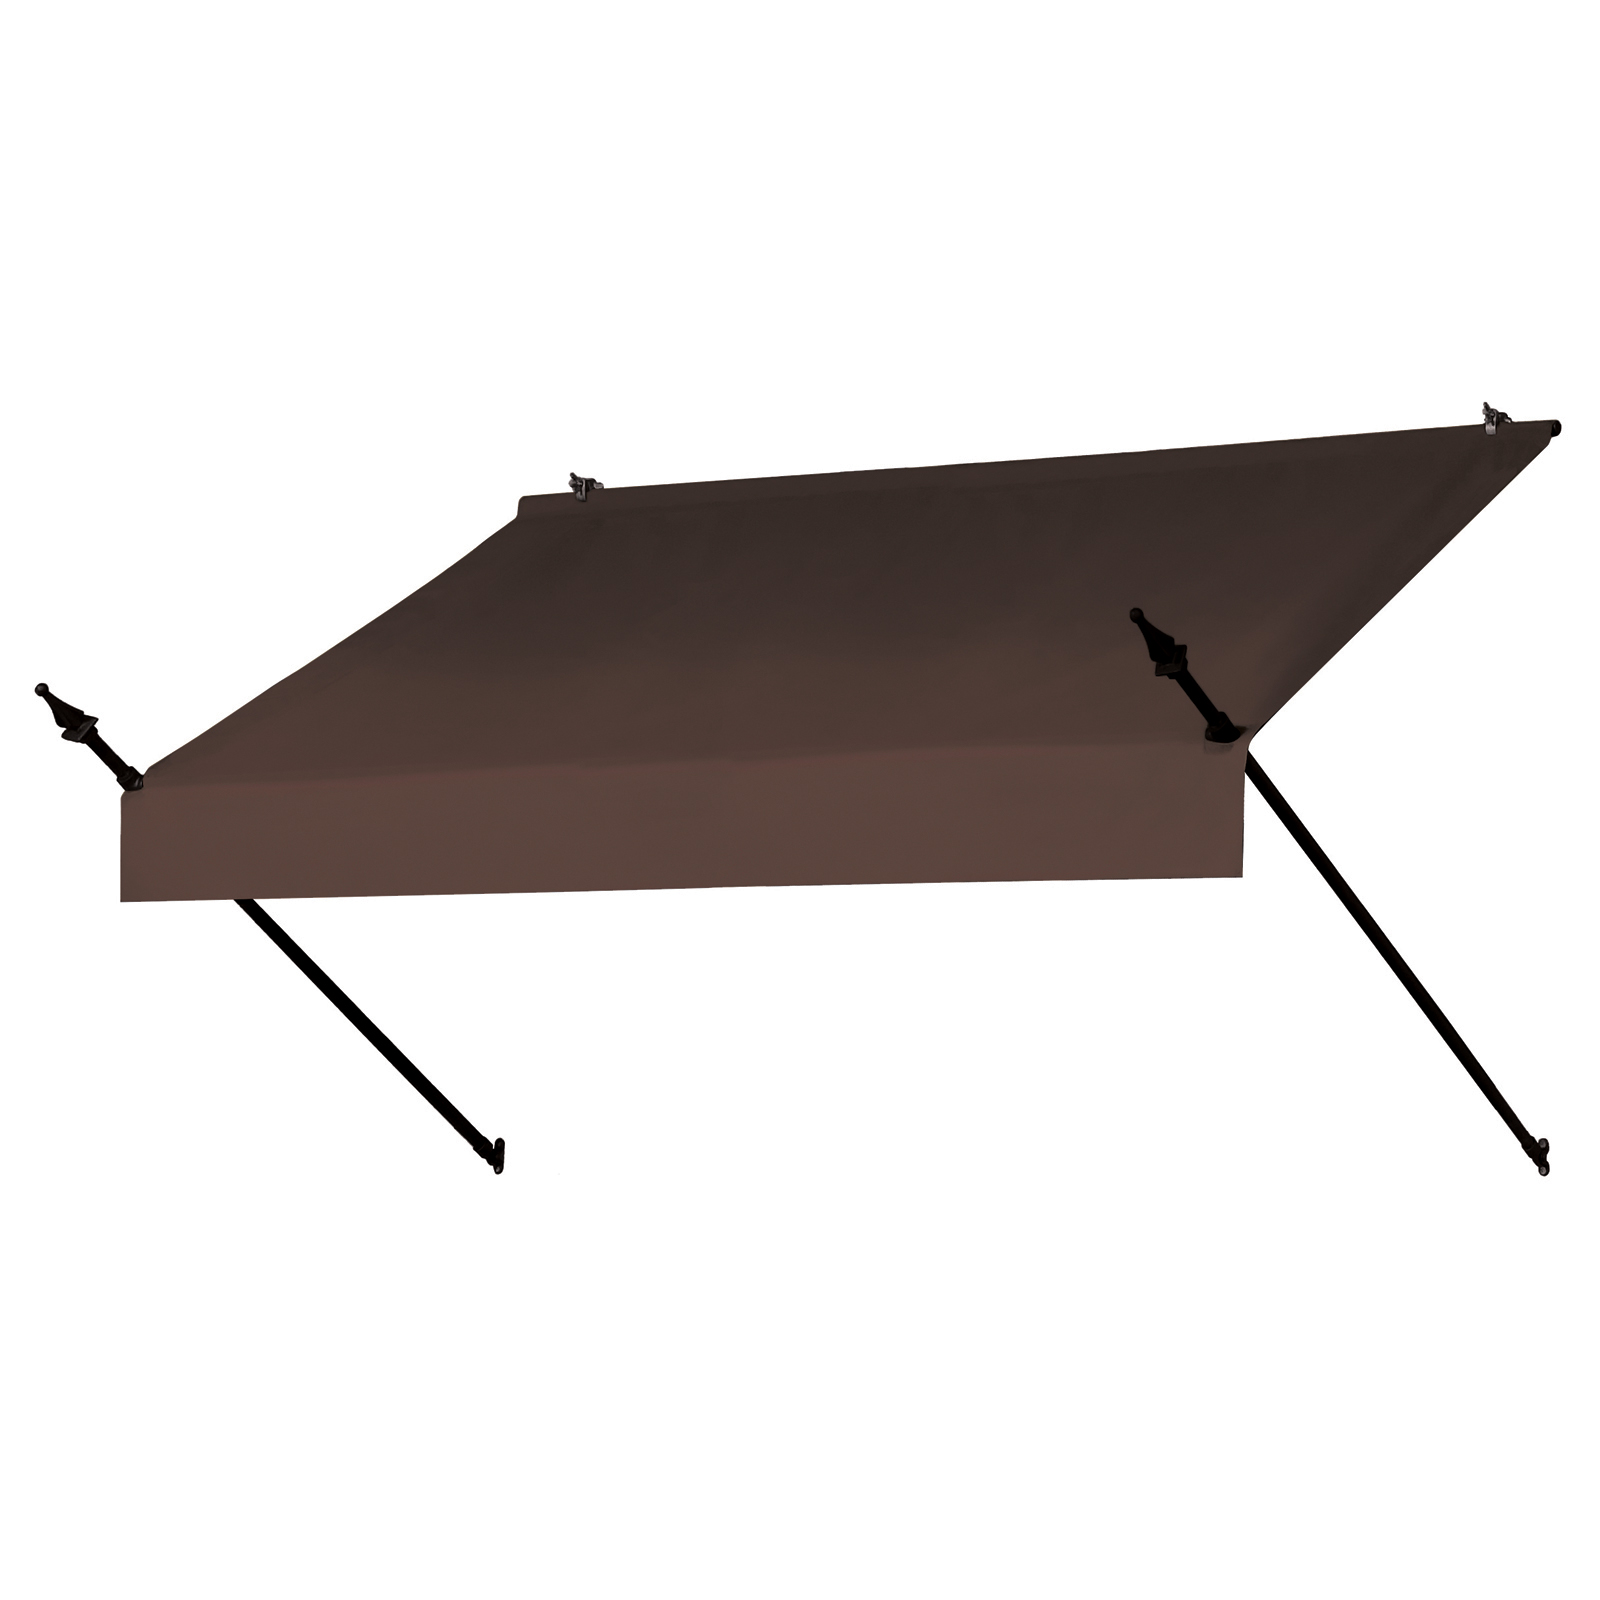 UPC 799870462987 product image for Coolaroo Awnings in a Box 8' Designer Style Awning in Assorted Colors | upcitemdb.com